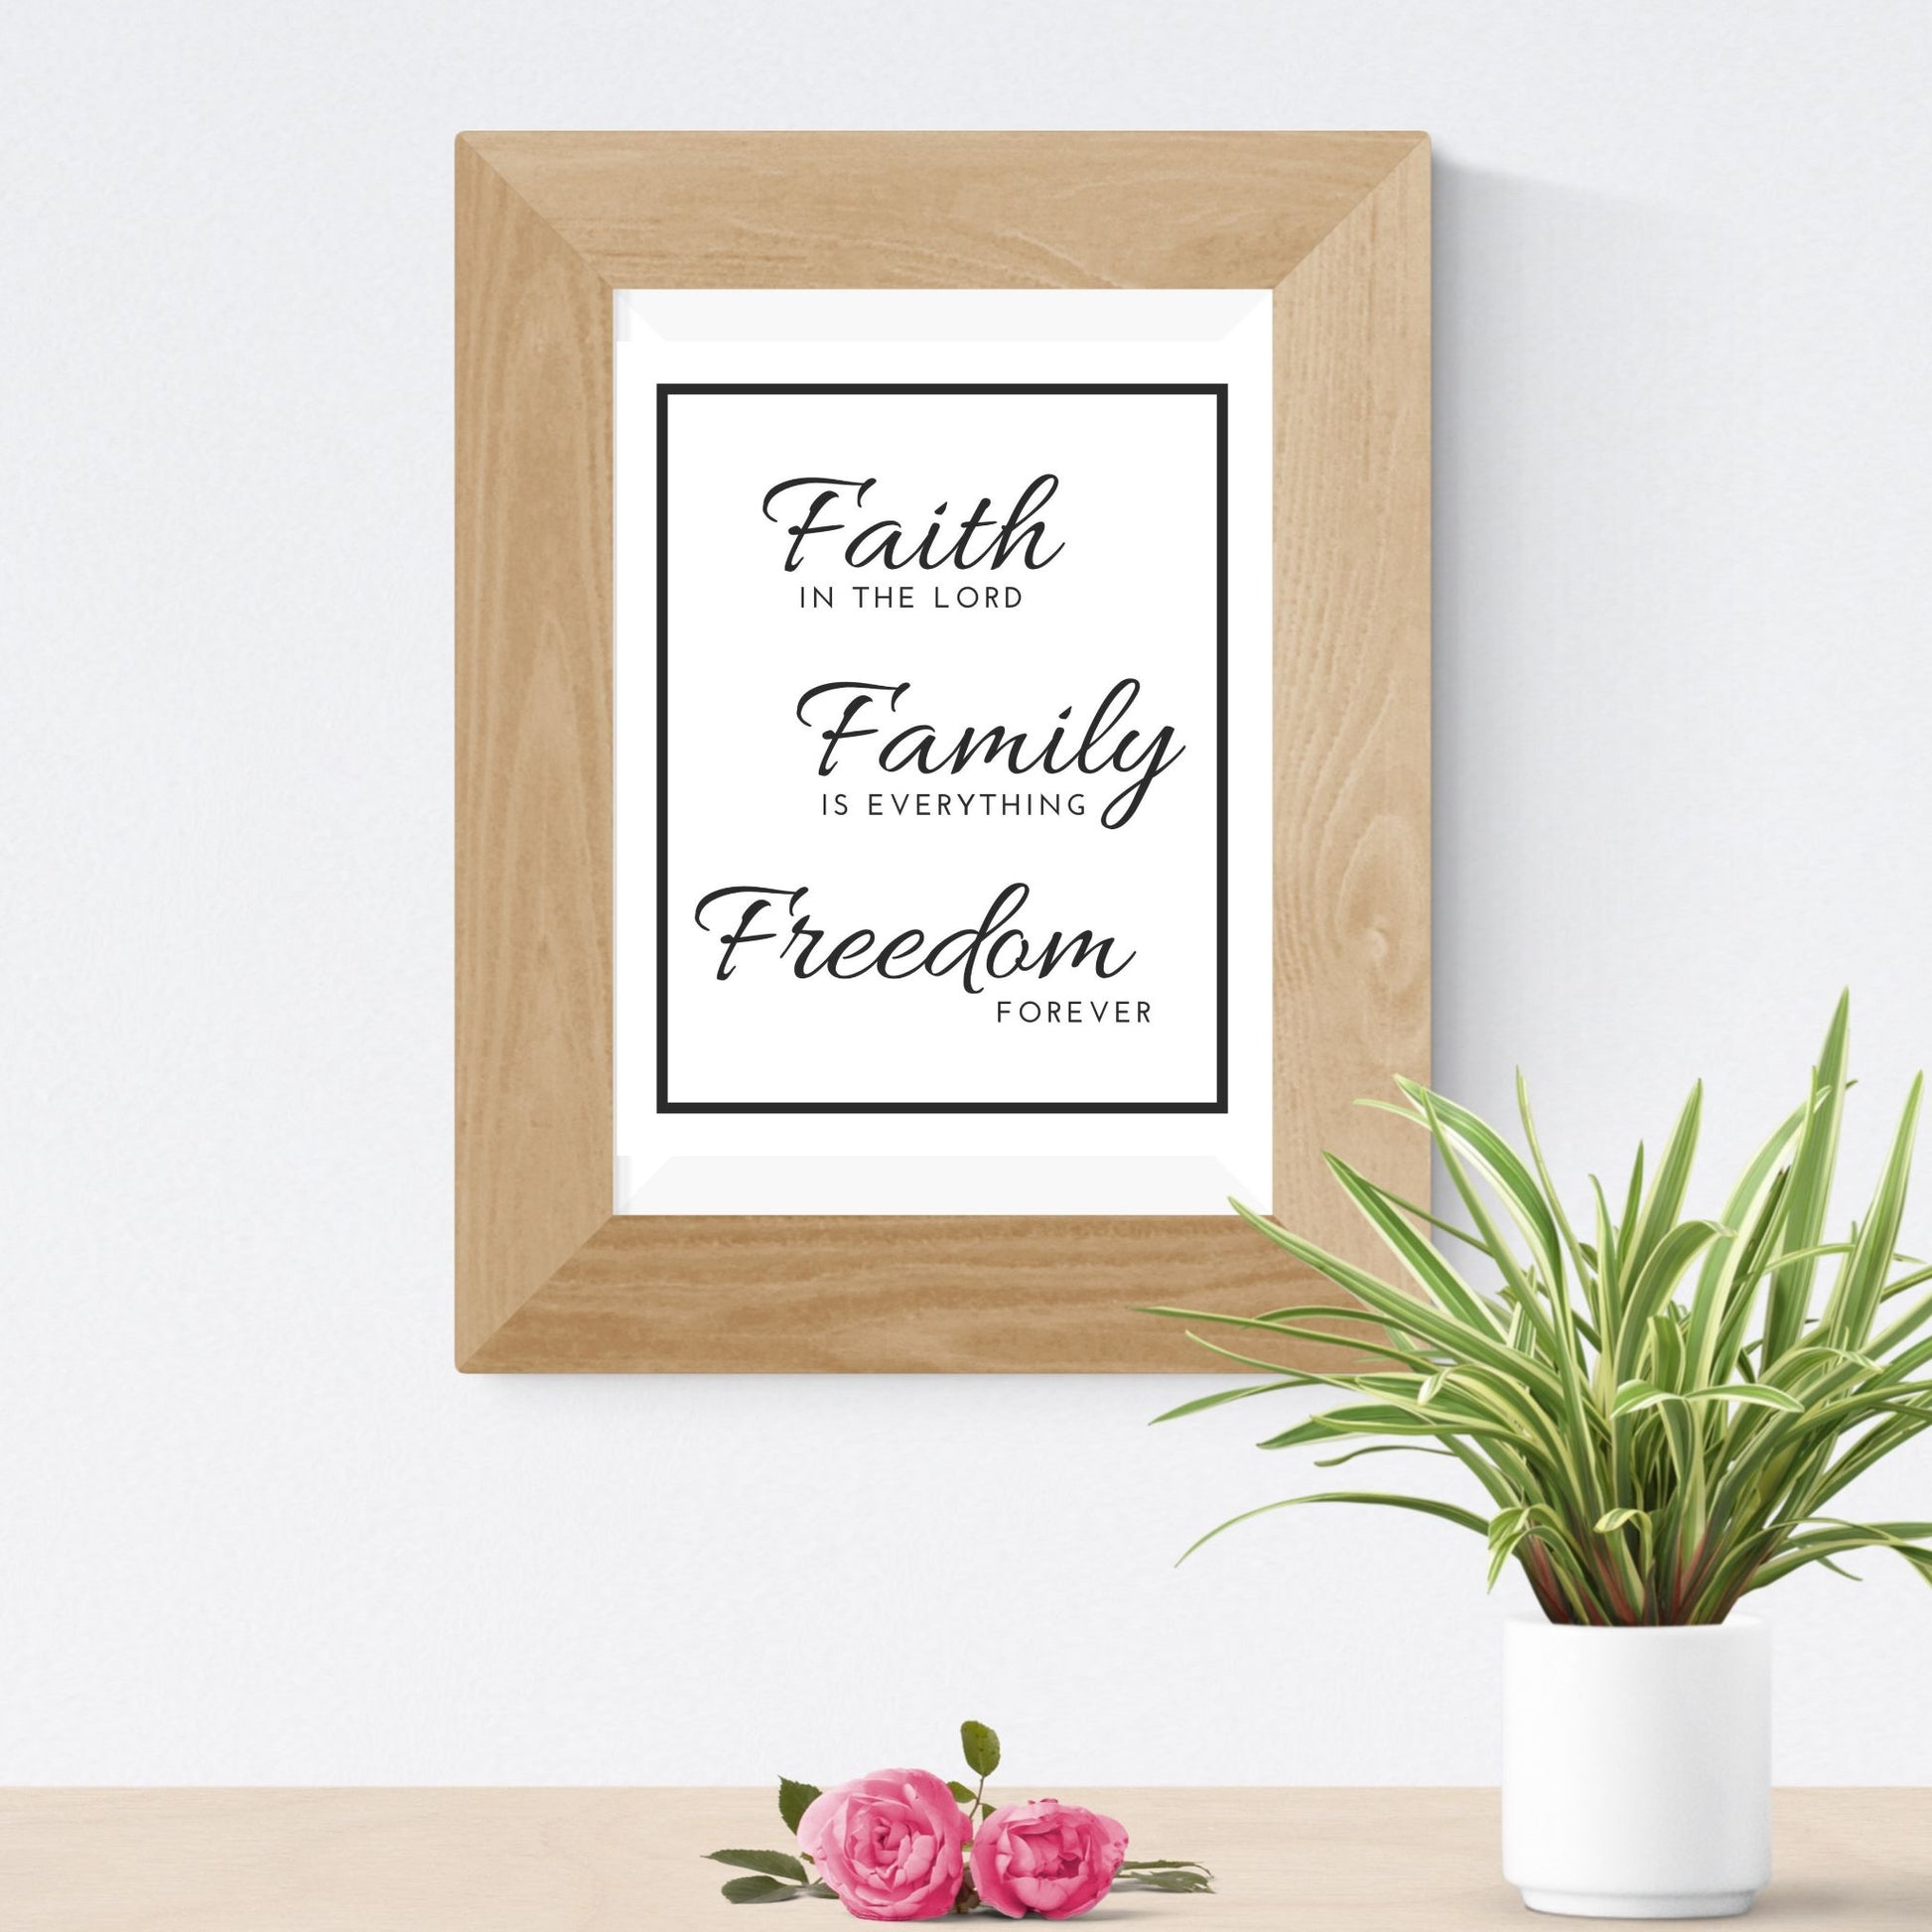 Inspirational Word Art Faith Family Freedom (printable download) | Reads... Faith IN THE LORD Family IS EVERYTHING Freedom FOREVER | Shown in Black and White with Black Border | Shown Framed for inspiration | oak7west.com